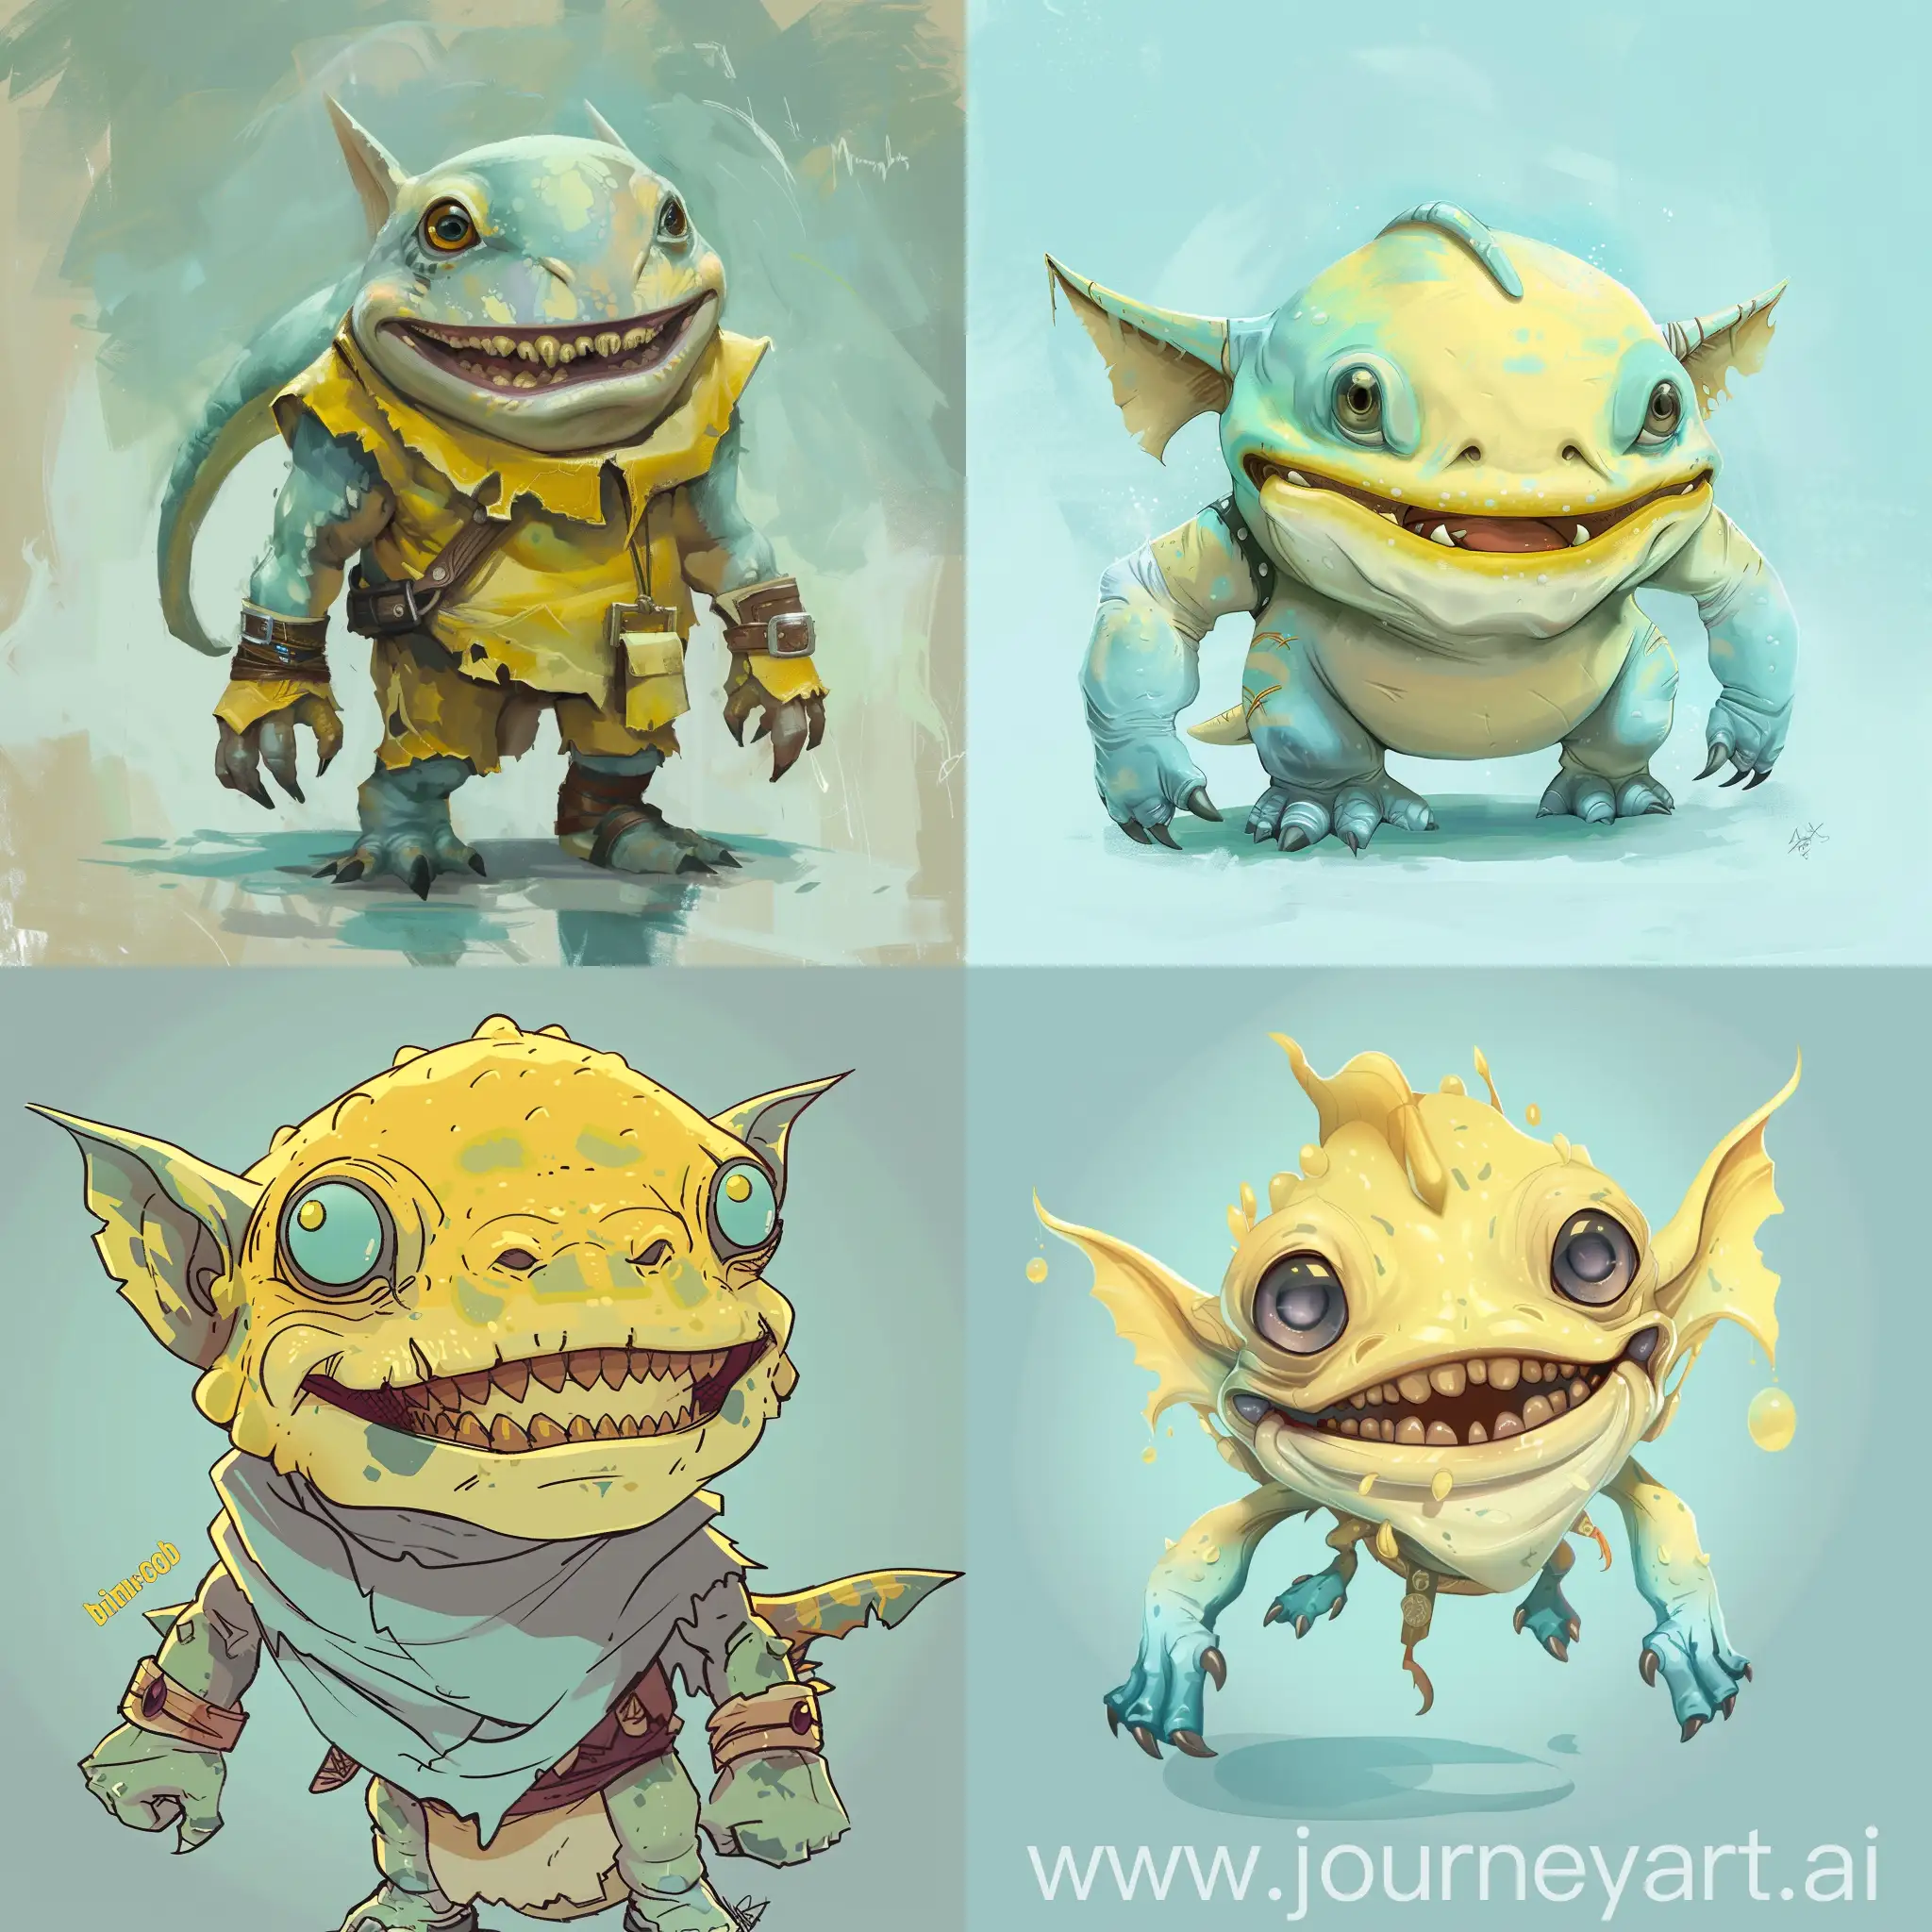 come up with the concept of a murloc merchant with a happy face. The colors are yellow and pale blue. Art should be like the classic blizzard style